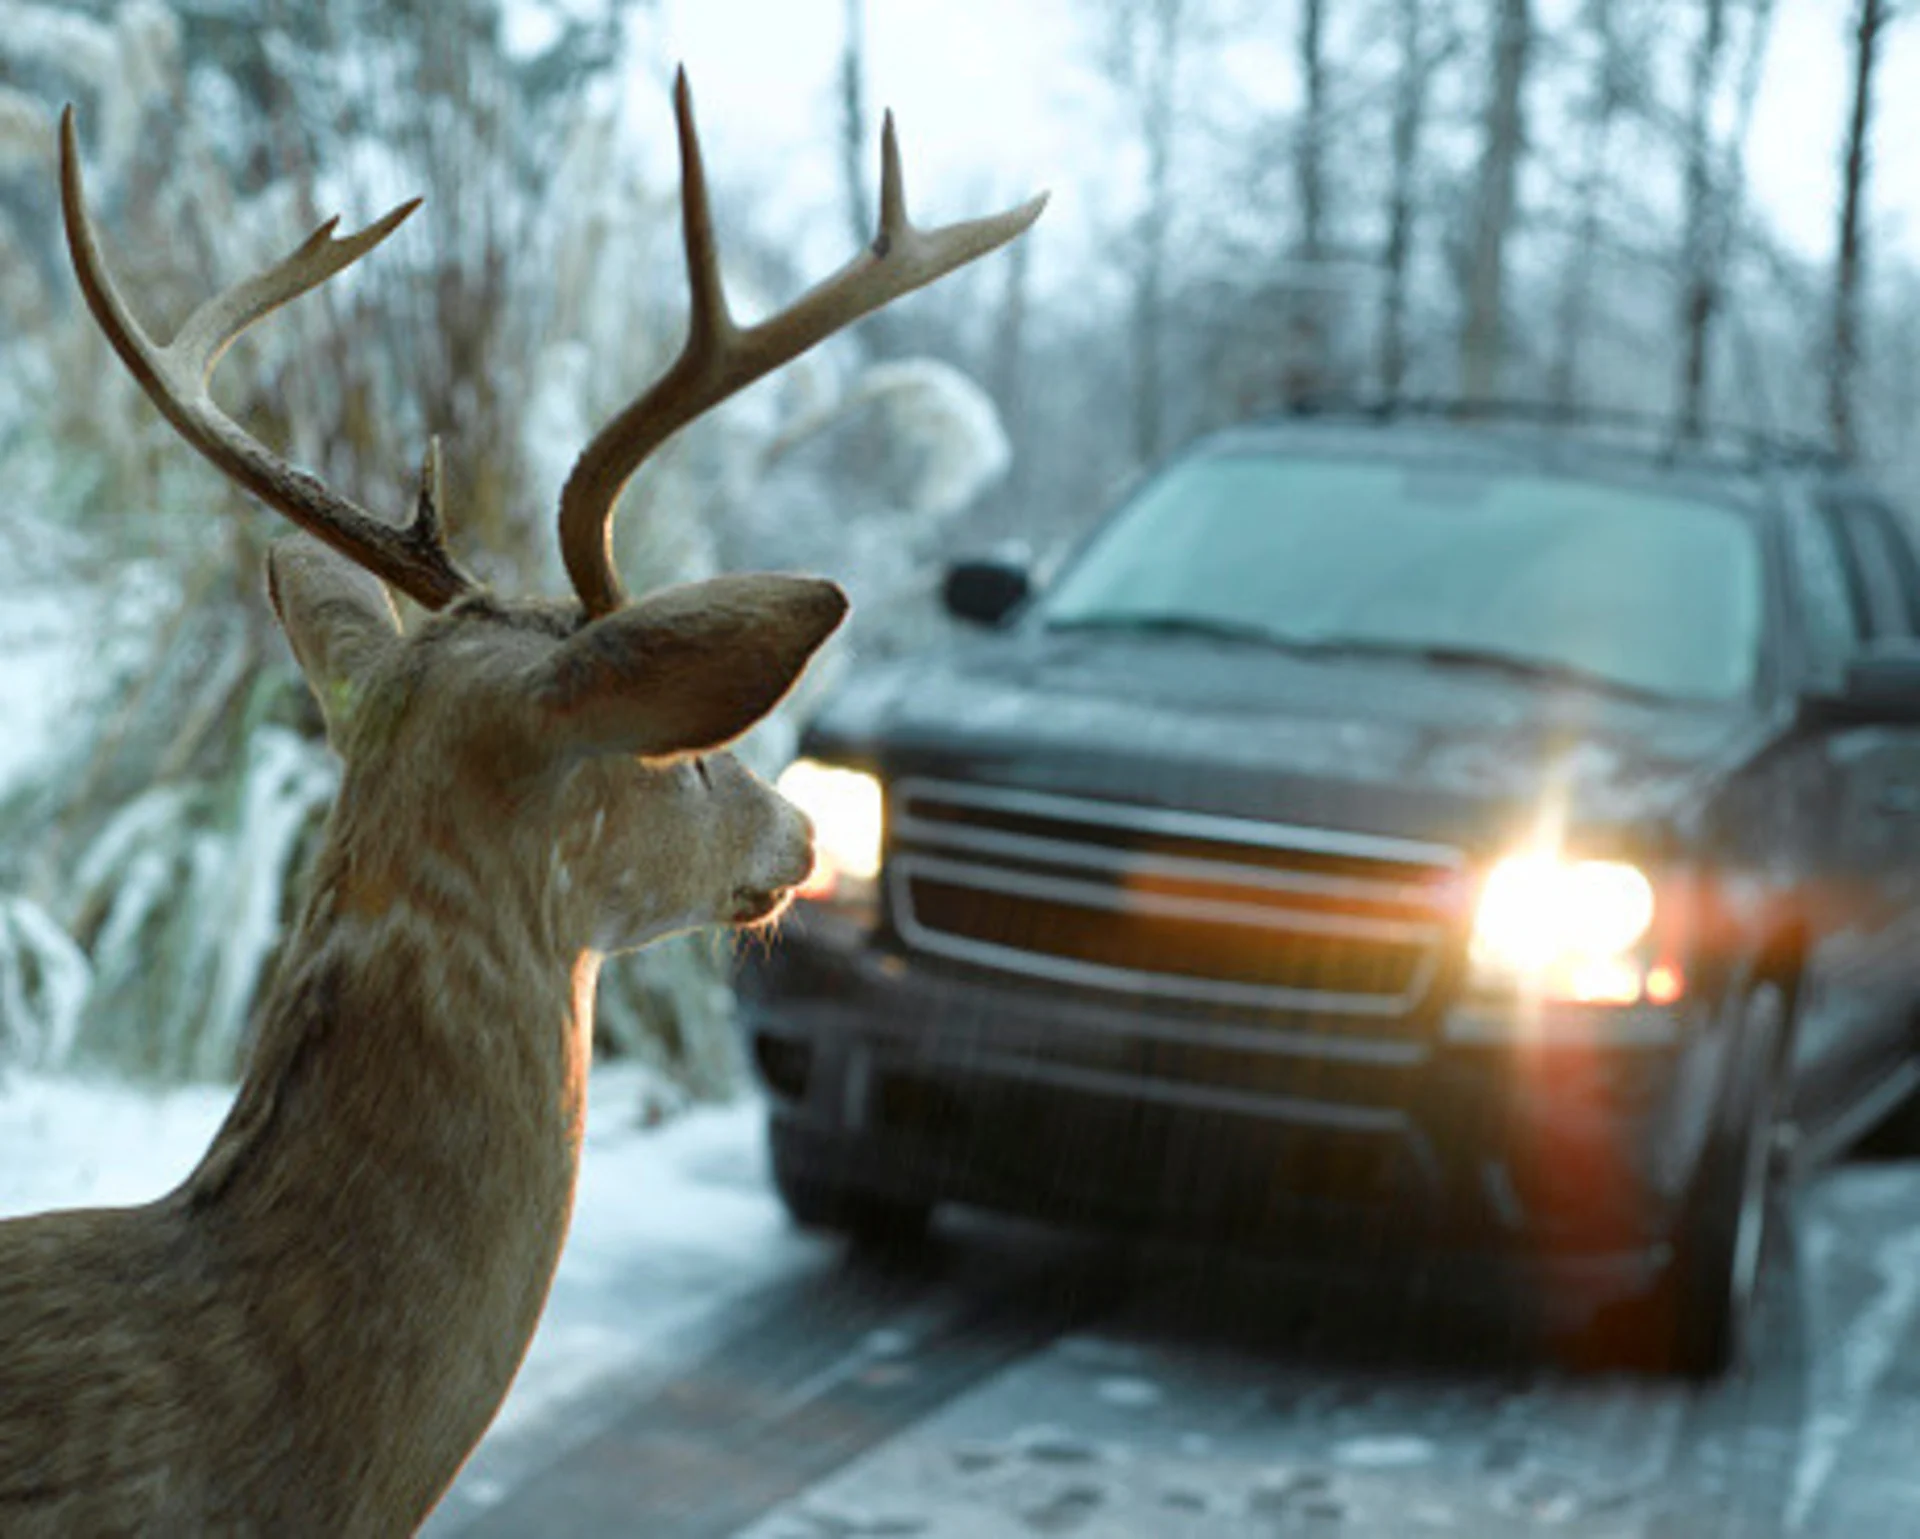 Drive safe: Tips to avoid wildlife collisions